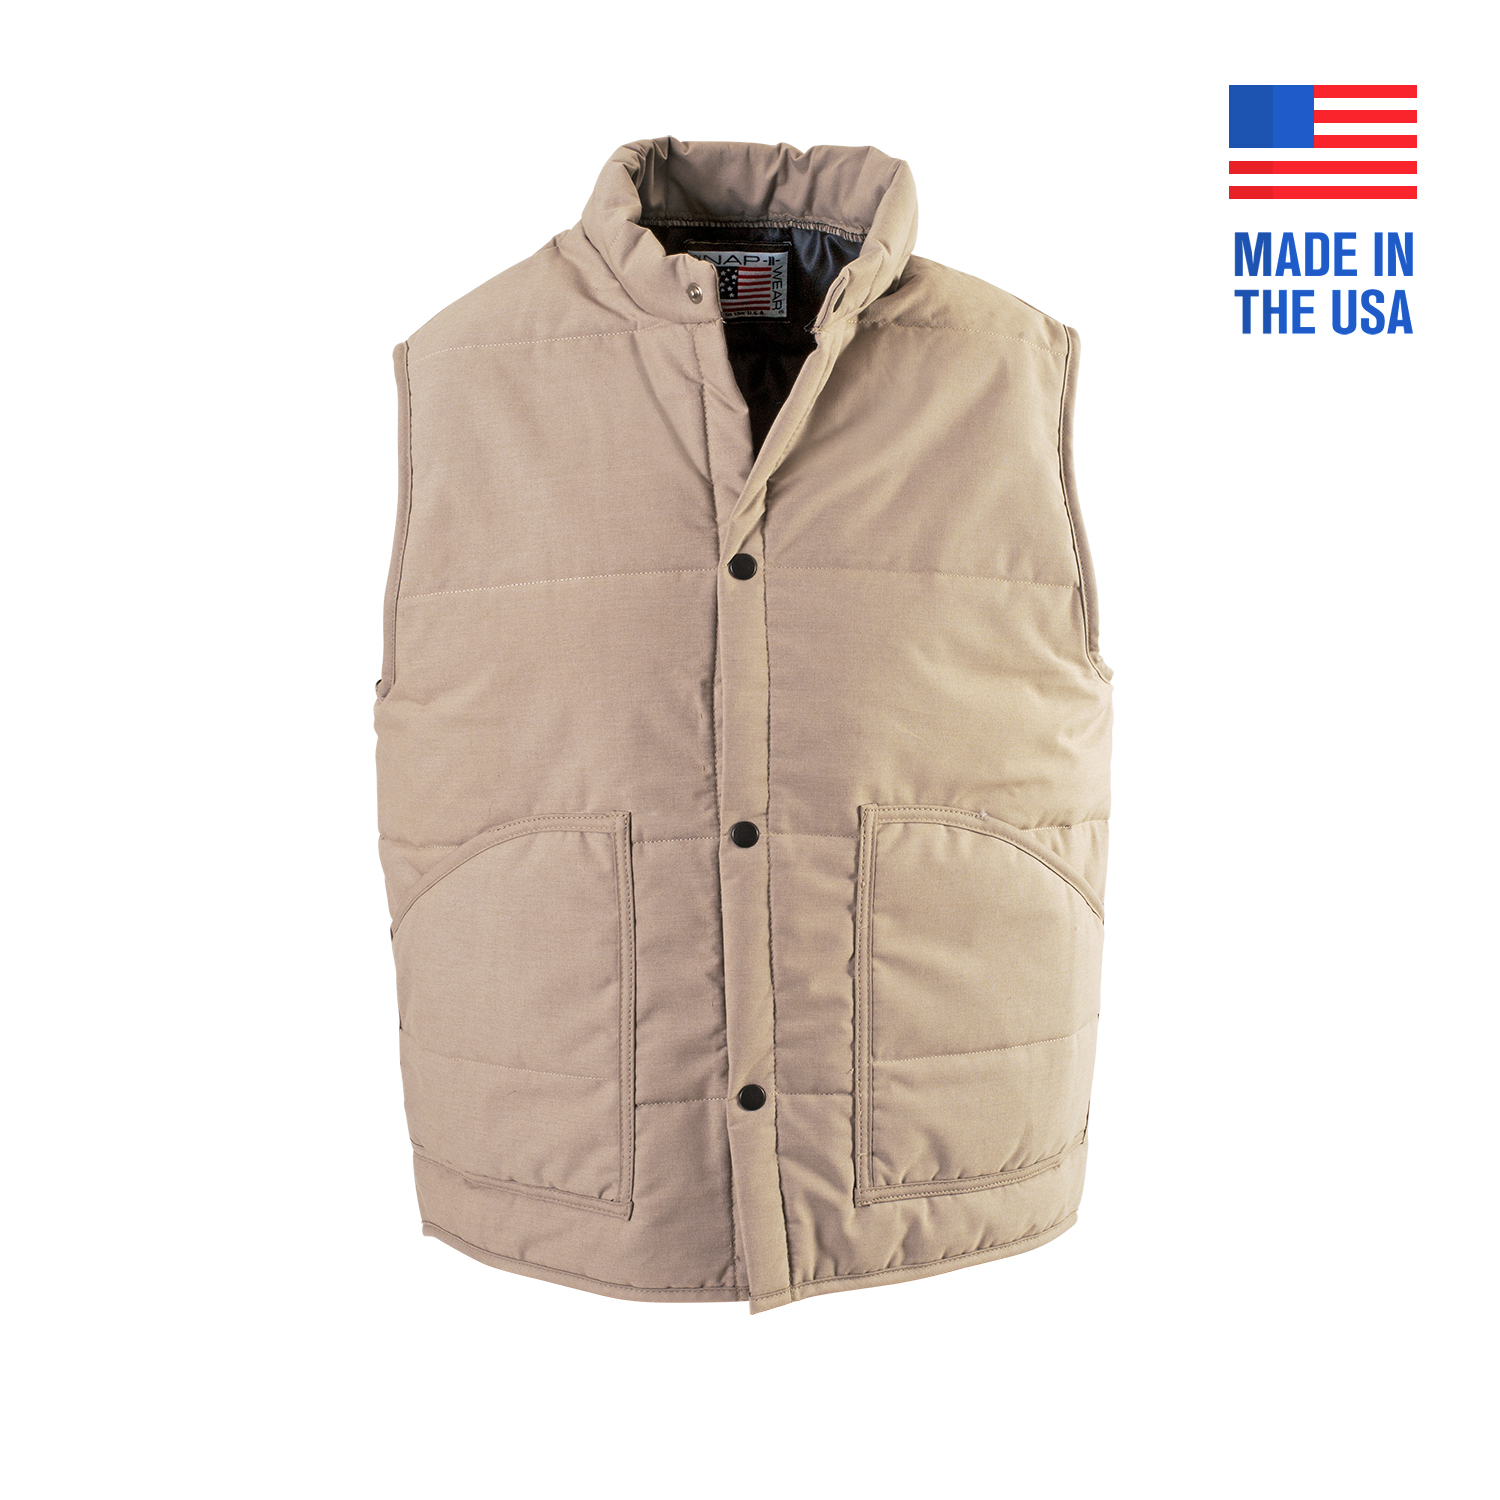 Insulated Vests Index — SNAP'N'WEAR